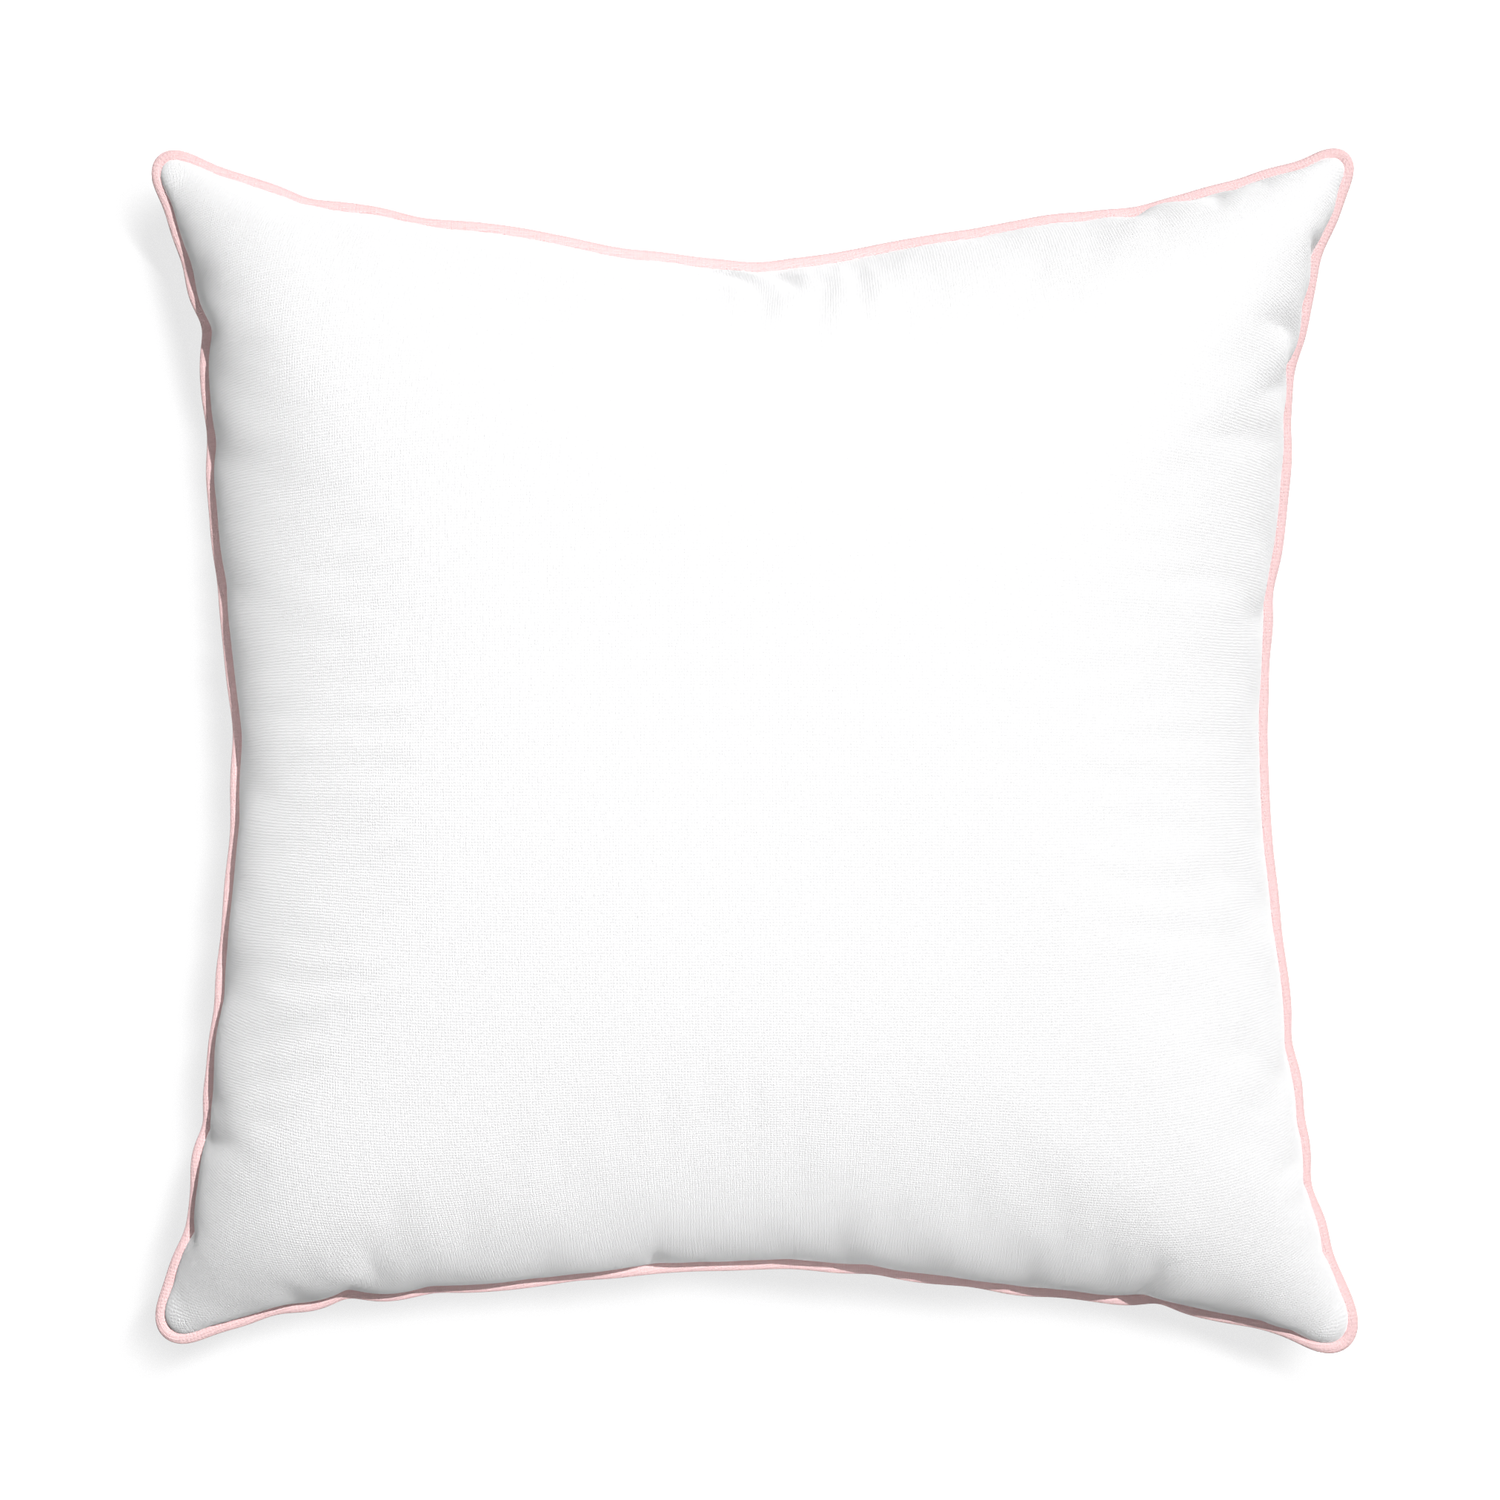 Euro-sham snow custom pillow with petal piping on white background